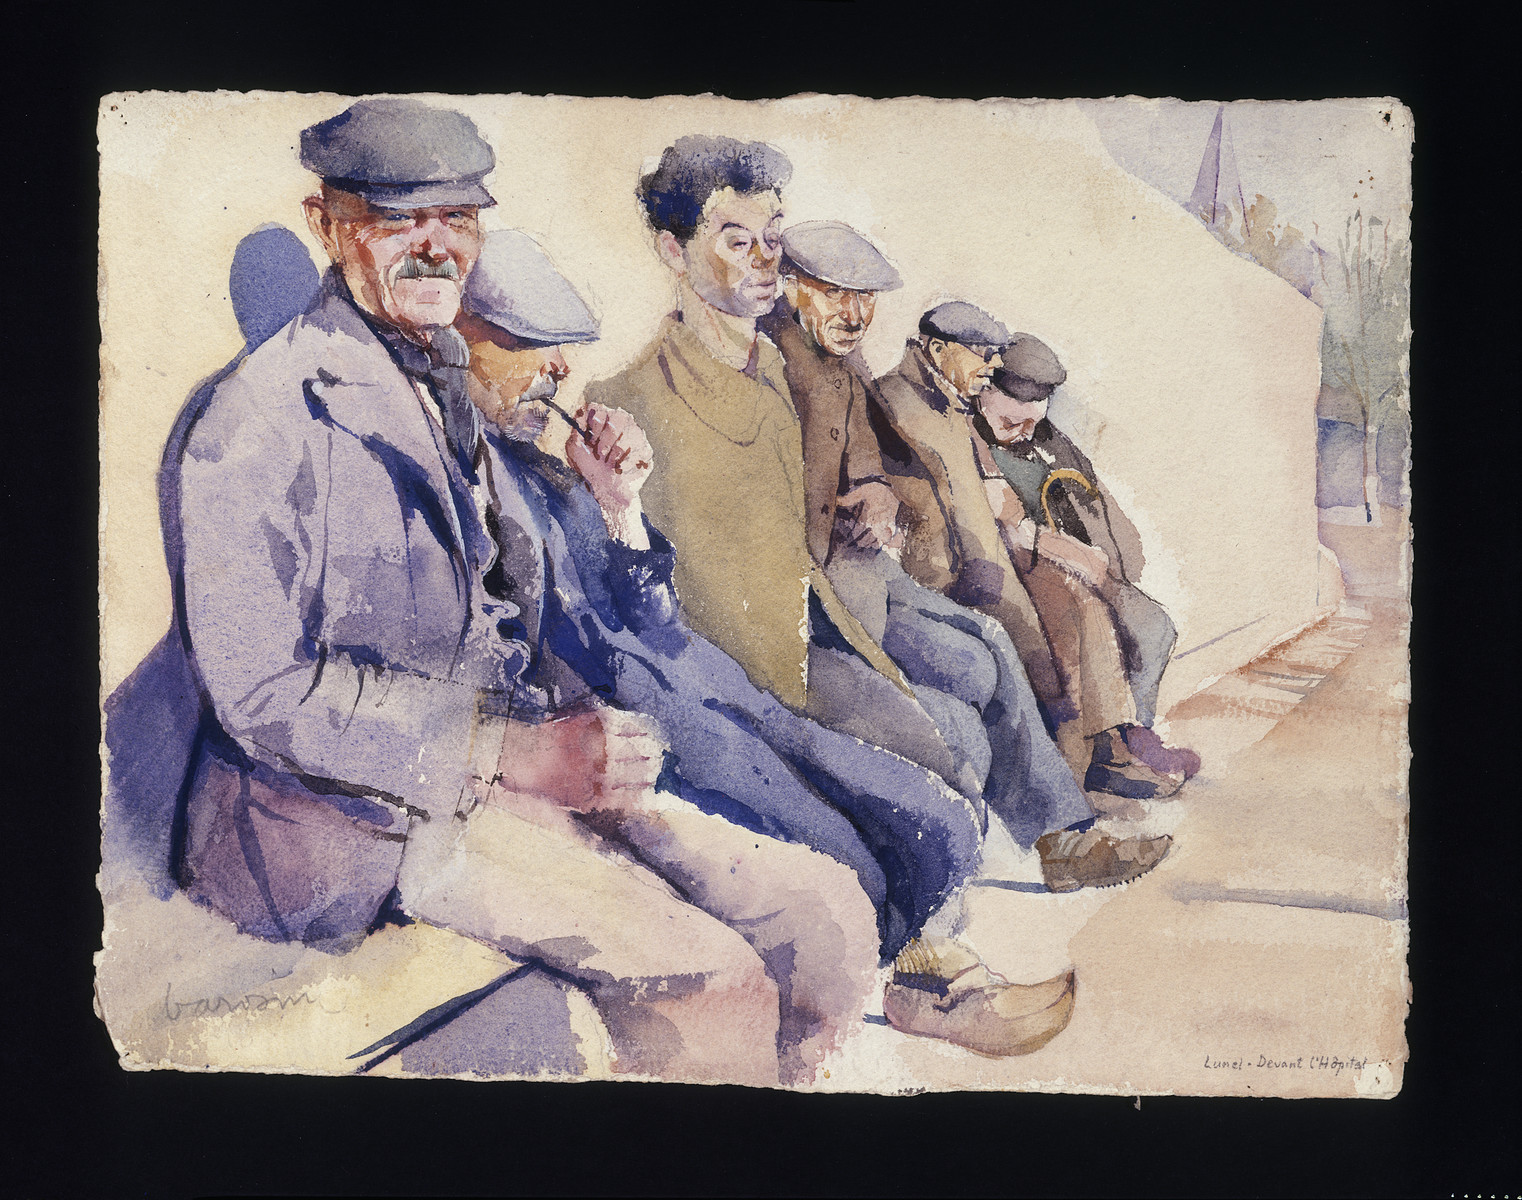 Painting by Jacob Barosin of men sitting outside on a bench.  The painting is entitled "In front of the hospital".